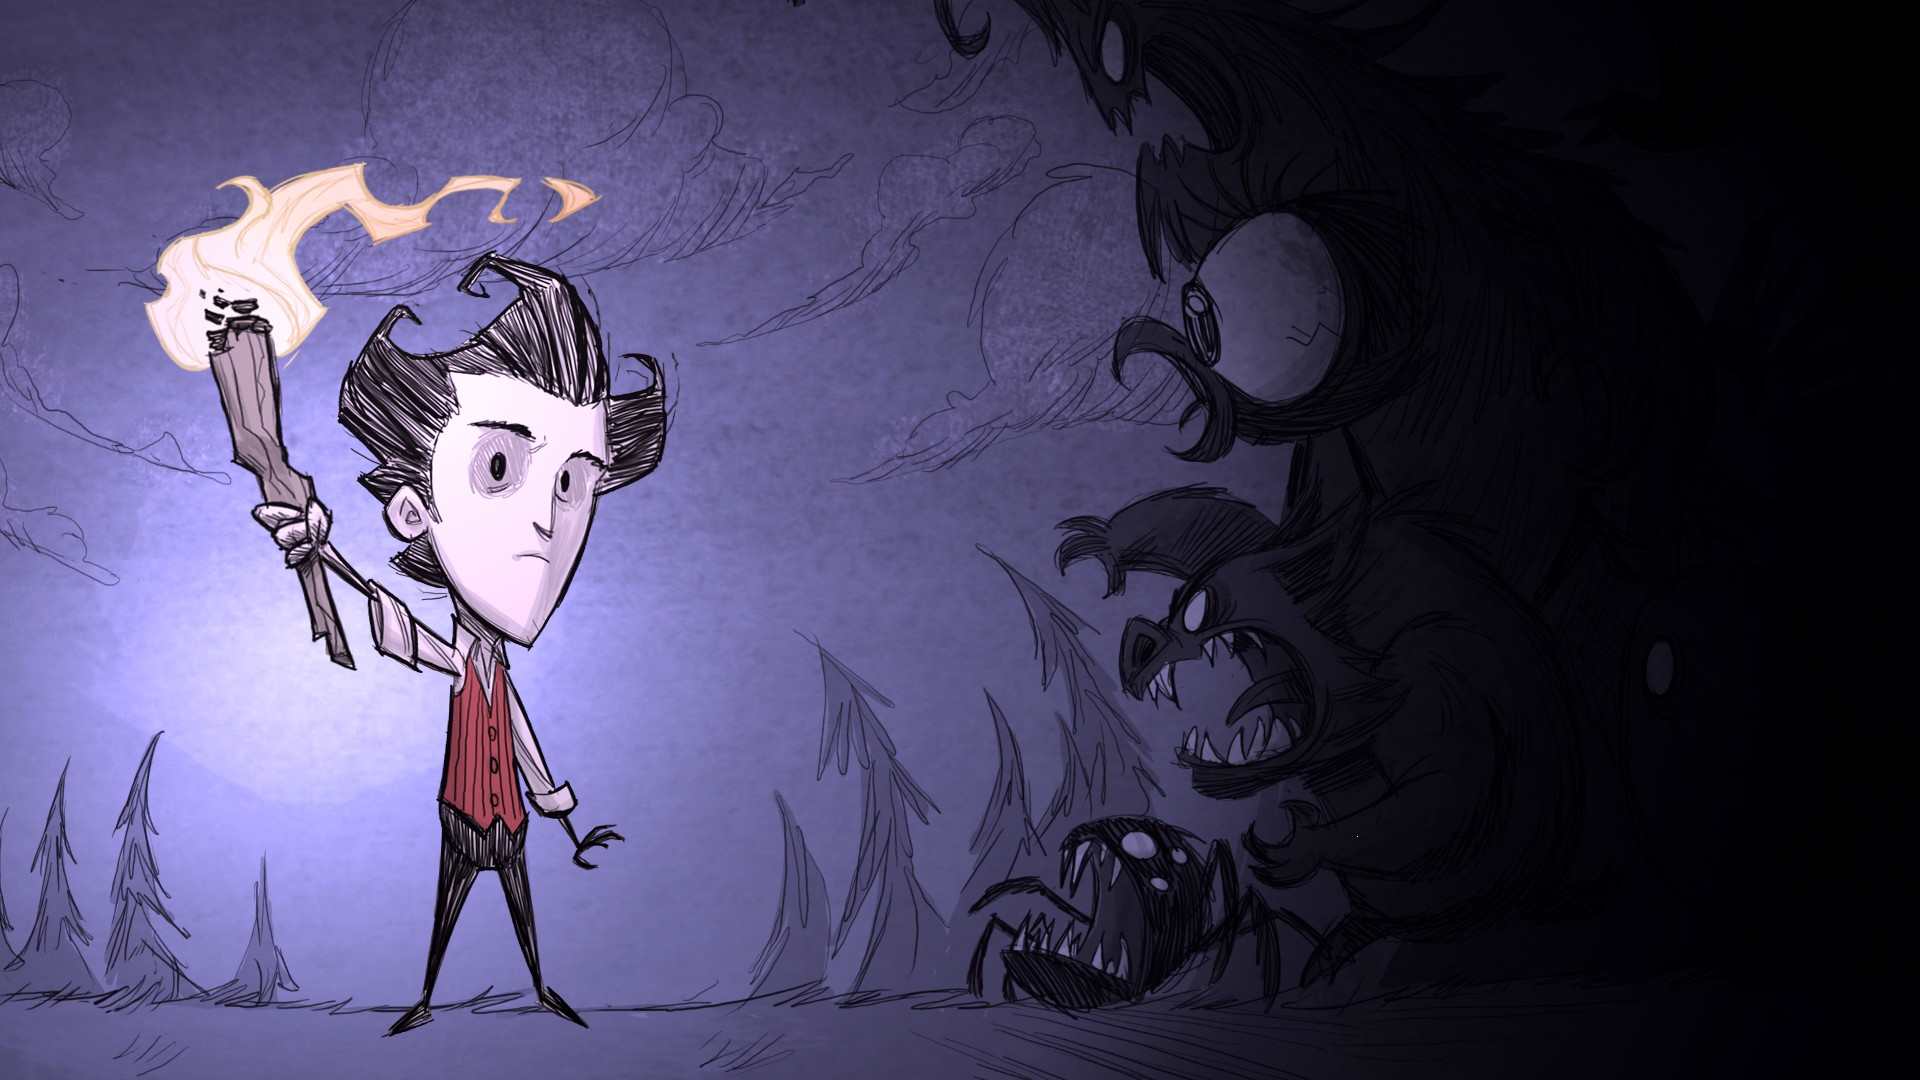 Dont le. Don't Starve together фон. Уилсон don't Starve. ДСТ игра.